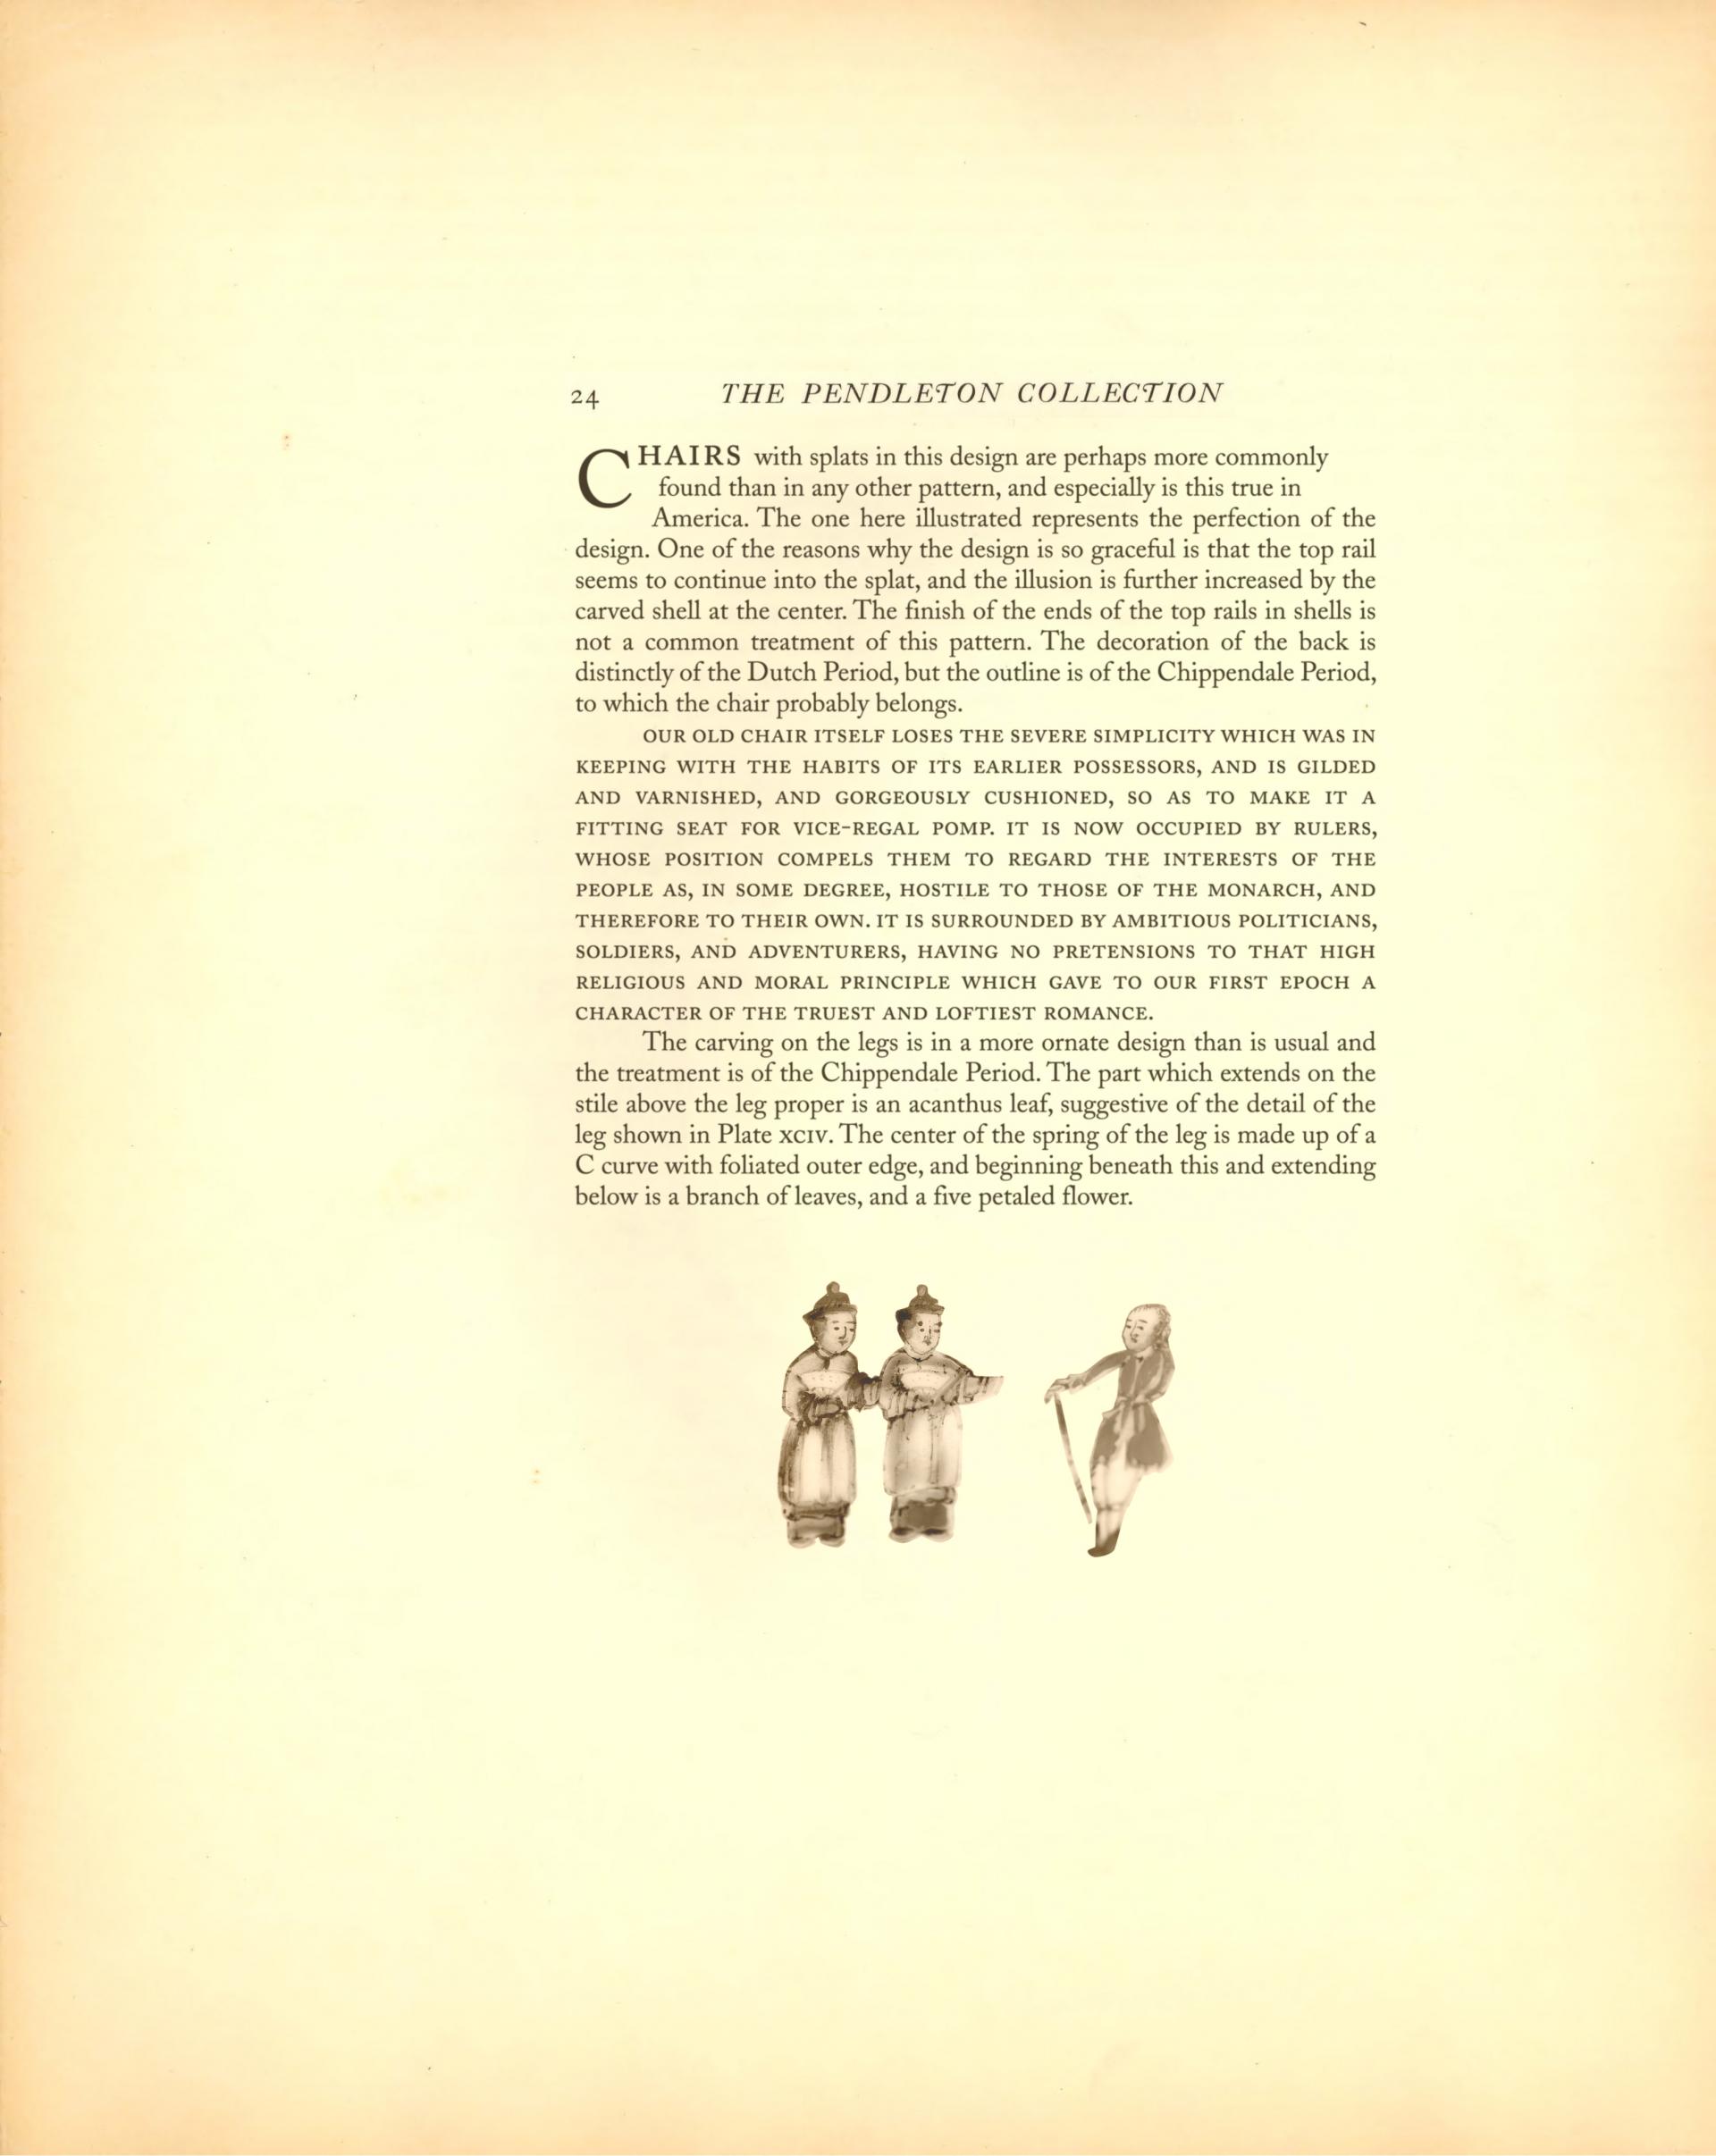 Pendleton Collection Catalog Page: text describing Chippendale chair, with an illustration of two eighteenth century Chinese figures with fans interacting with a figure in Western attire with a cane